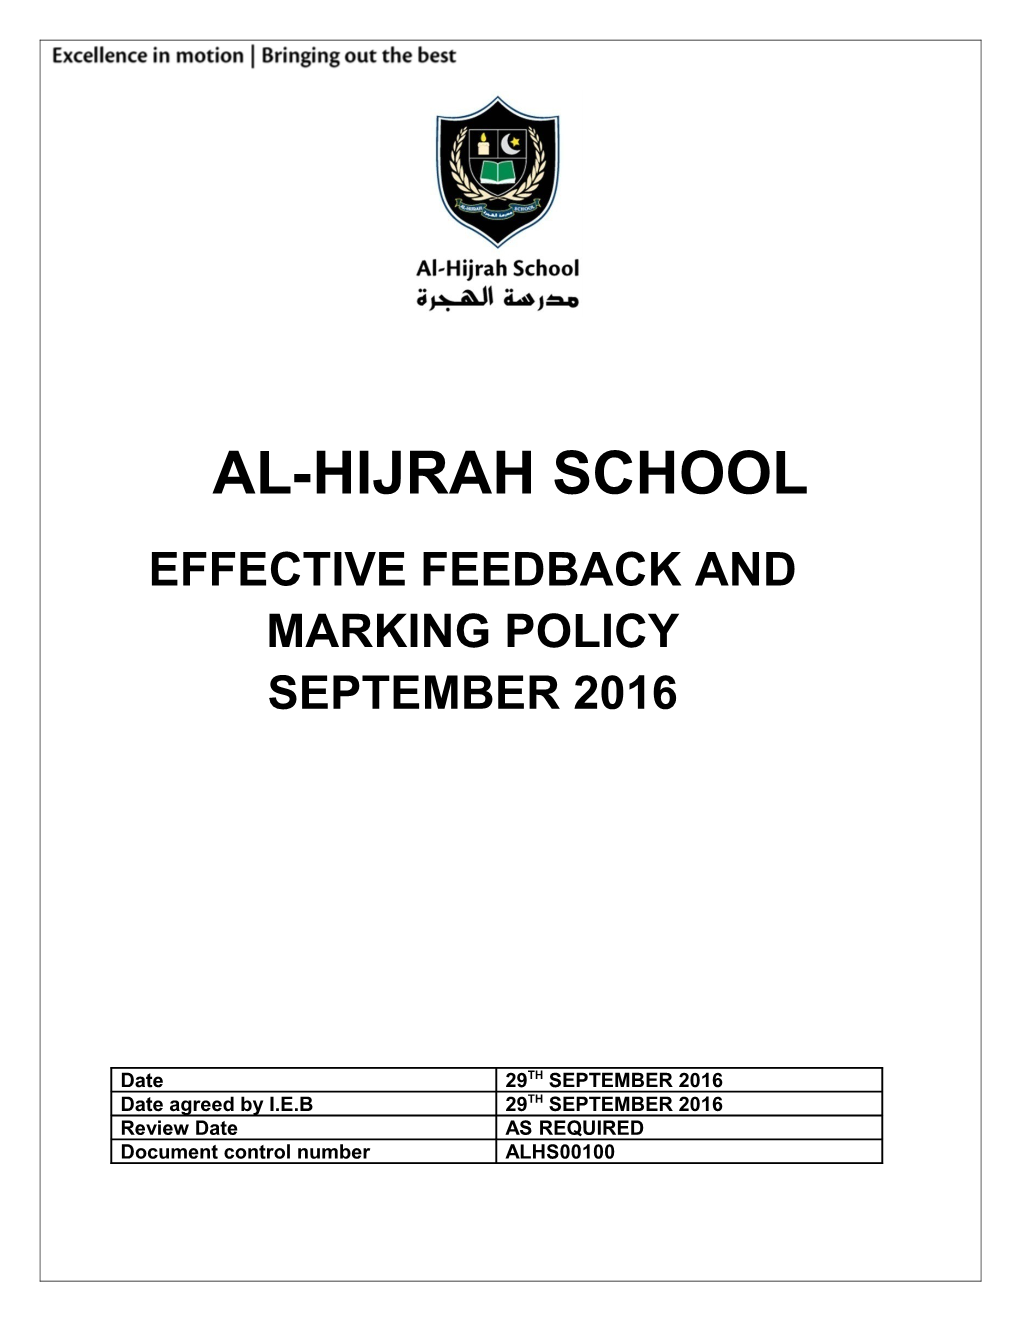 Effective Feedback and Marking Policy September 2016